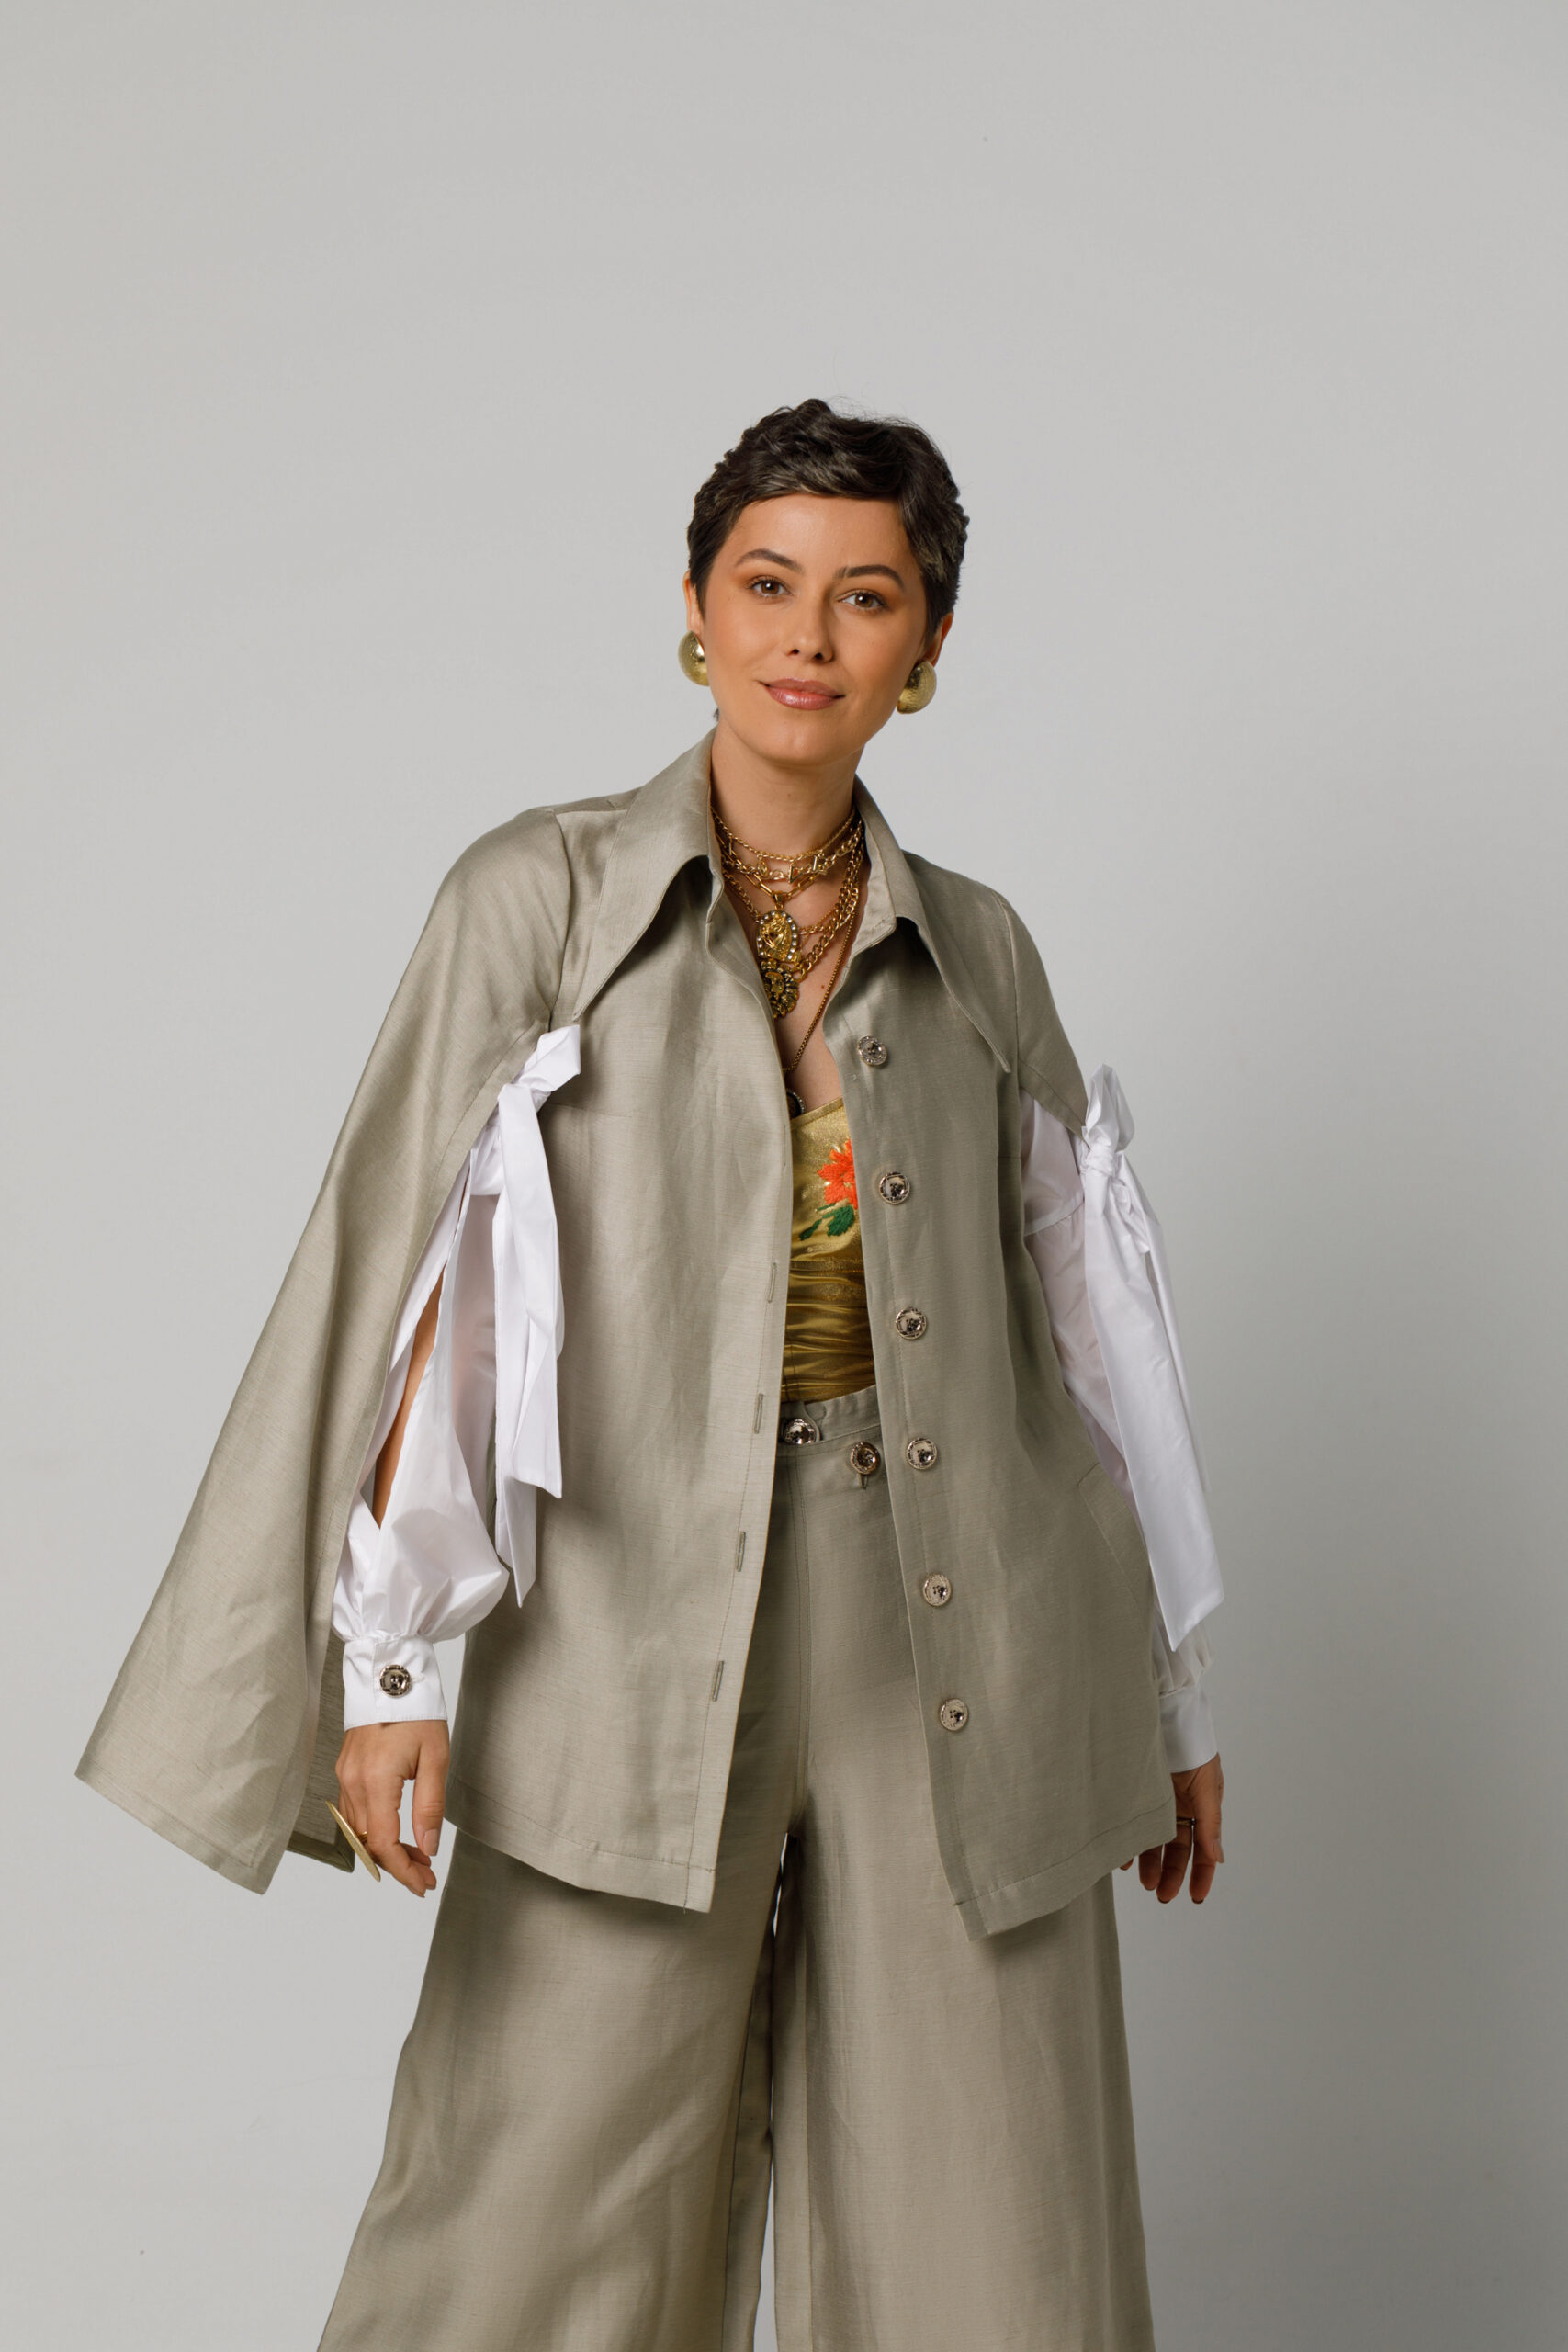 ABBY statement linen jacket with bow detail. Natural fabrics, original design, handmade embroidery